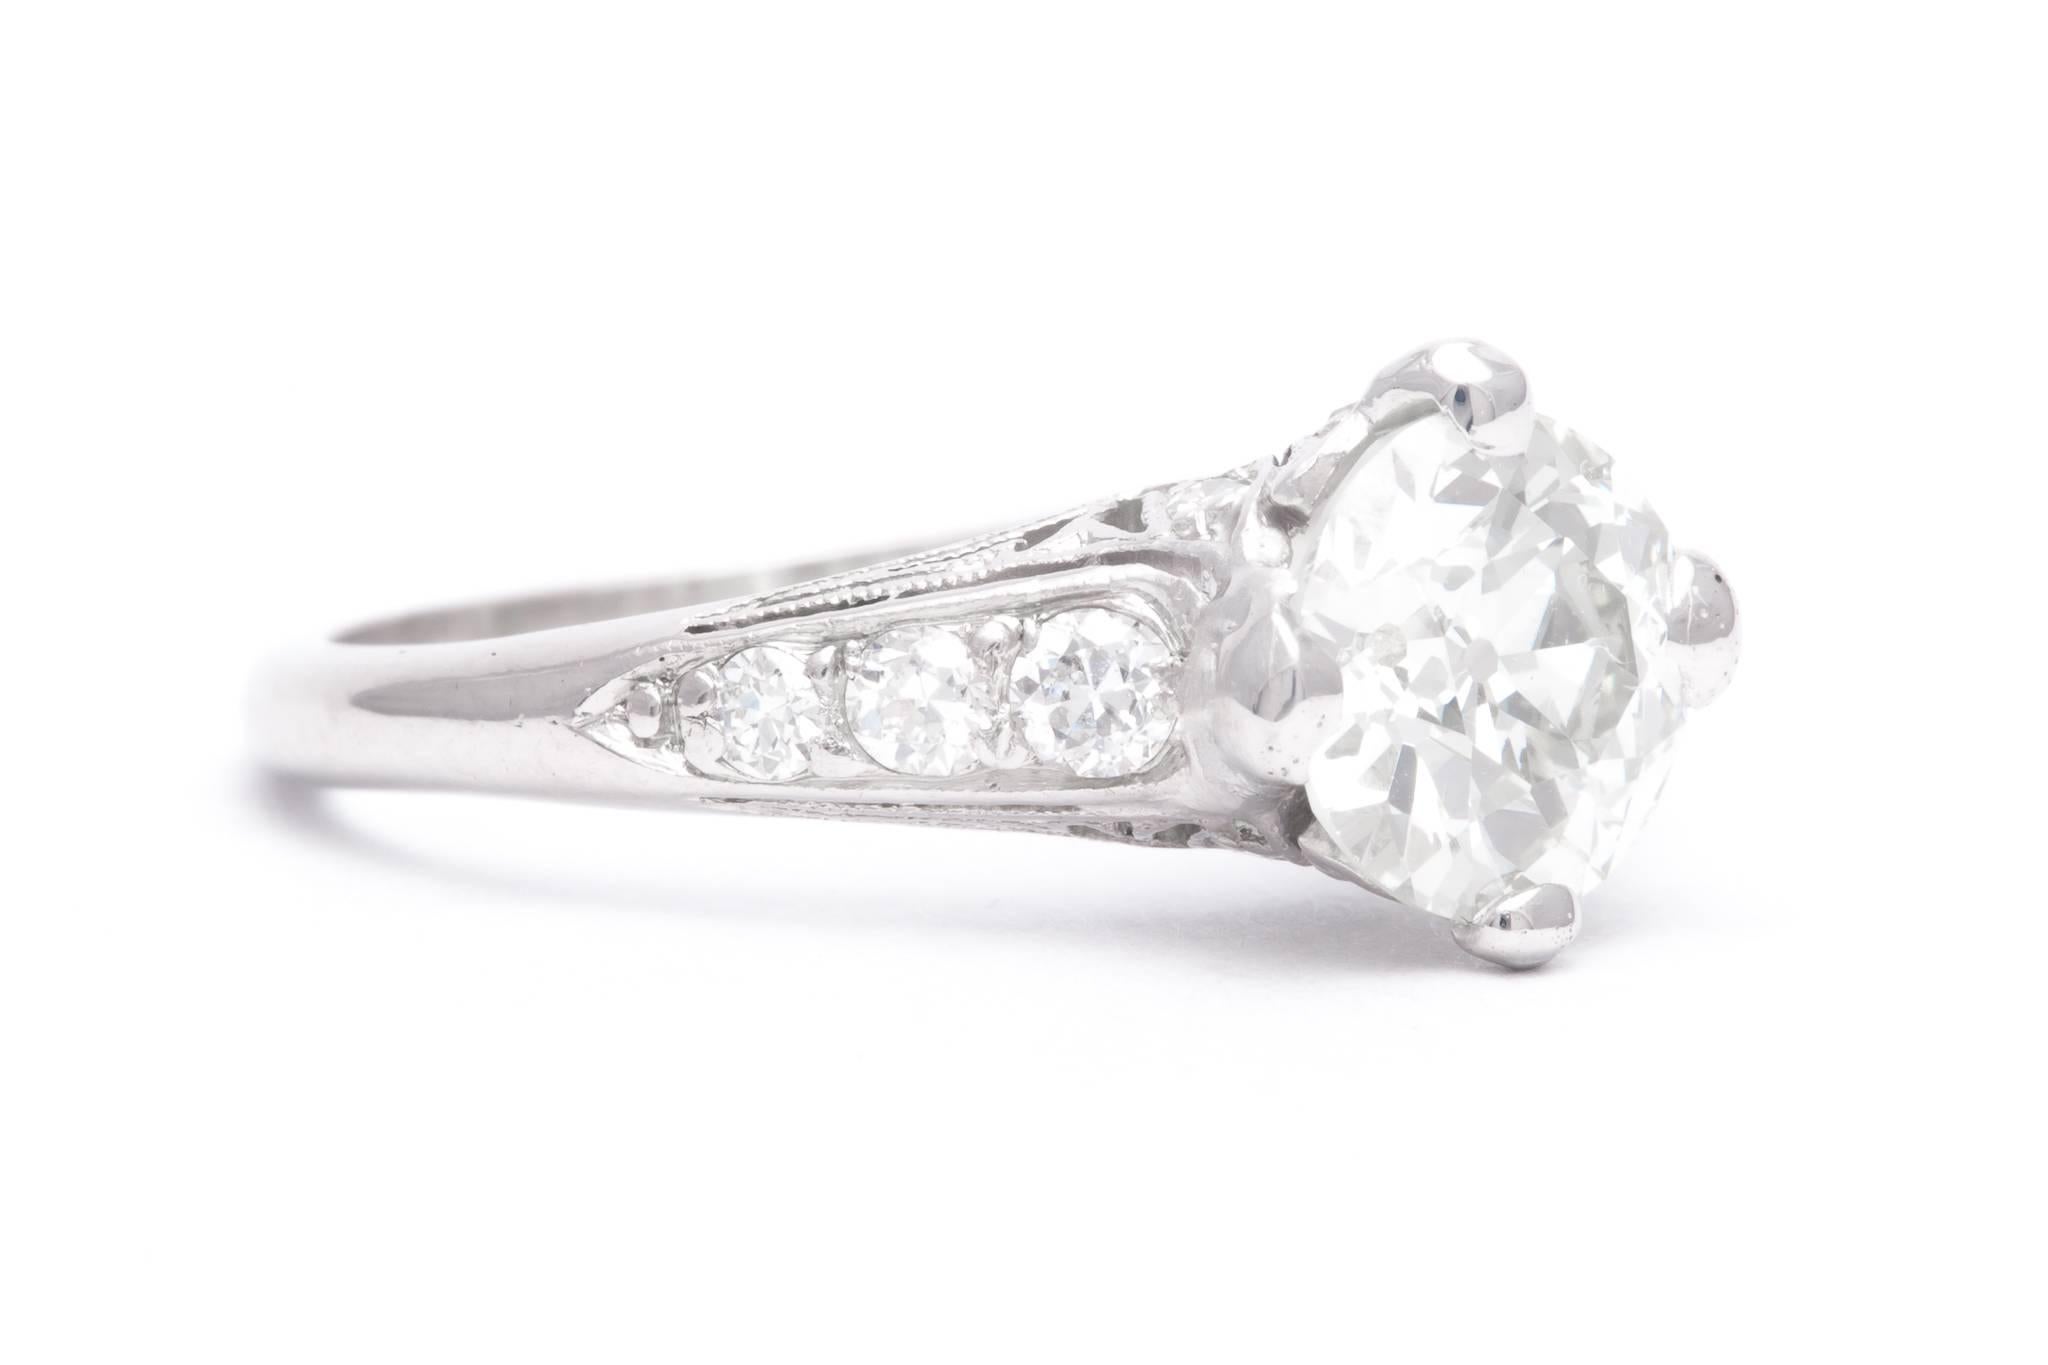 An art deco period diamond engagement ring in luxurious platinum.  Centered by a GIA Certified 1.53 carat Old European cut diamond this ring features a beautiful hand crafted platinum mounting.

Grading as beautiful VS2 clarity and K color, the 1.53